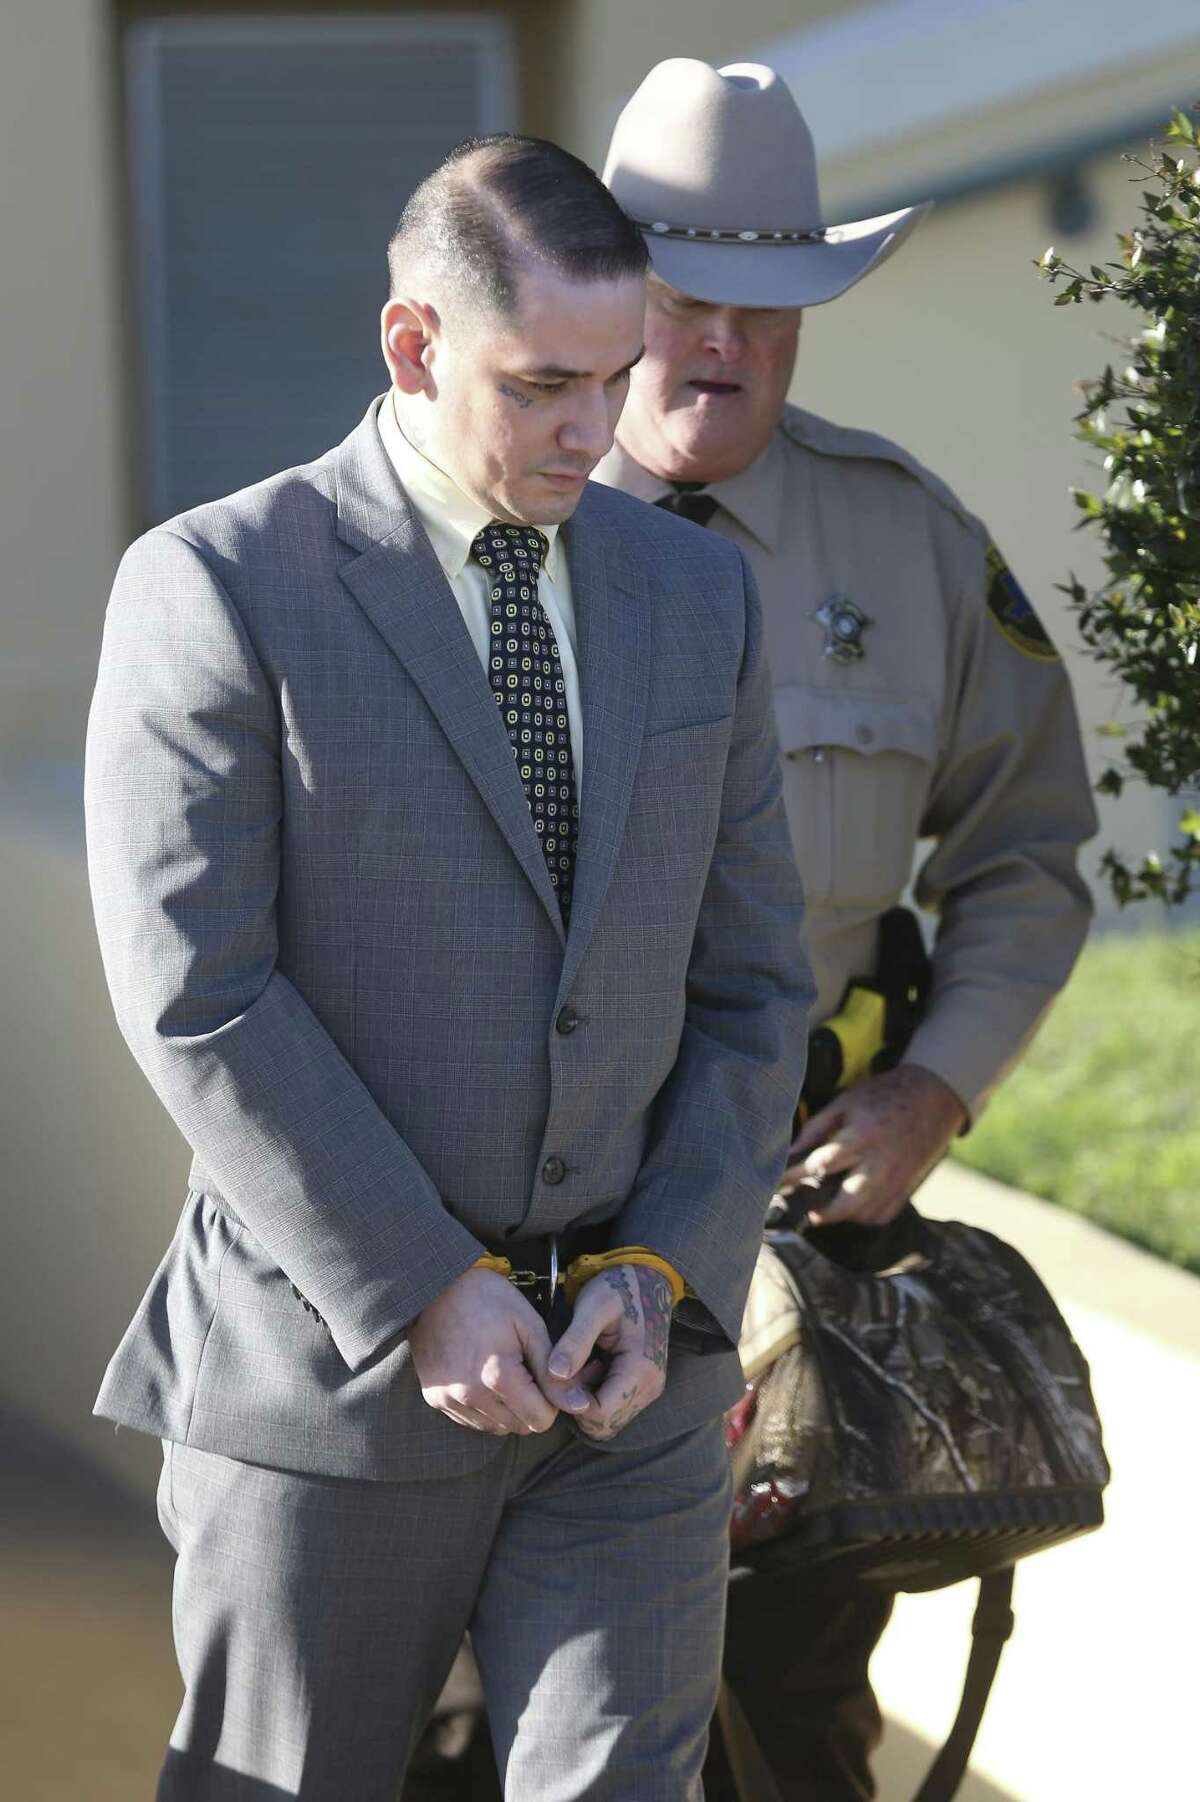 Shaun Ruiz Puente, 36, left, who is accused of shooting and killing SAPD Officer Robert Deckard during a multi-county chase Dec. 8, 2013, is escorted by an Atascosa County Sheriff Deputy back to the Atascosa County Jail after the second day of his capital murder trial Wednesday, March 7, 2017 in the Atascosa County courthouse in Jourdanton. A jury now is deliberating in the case.